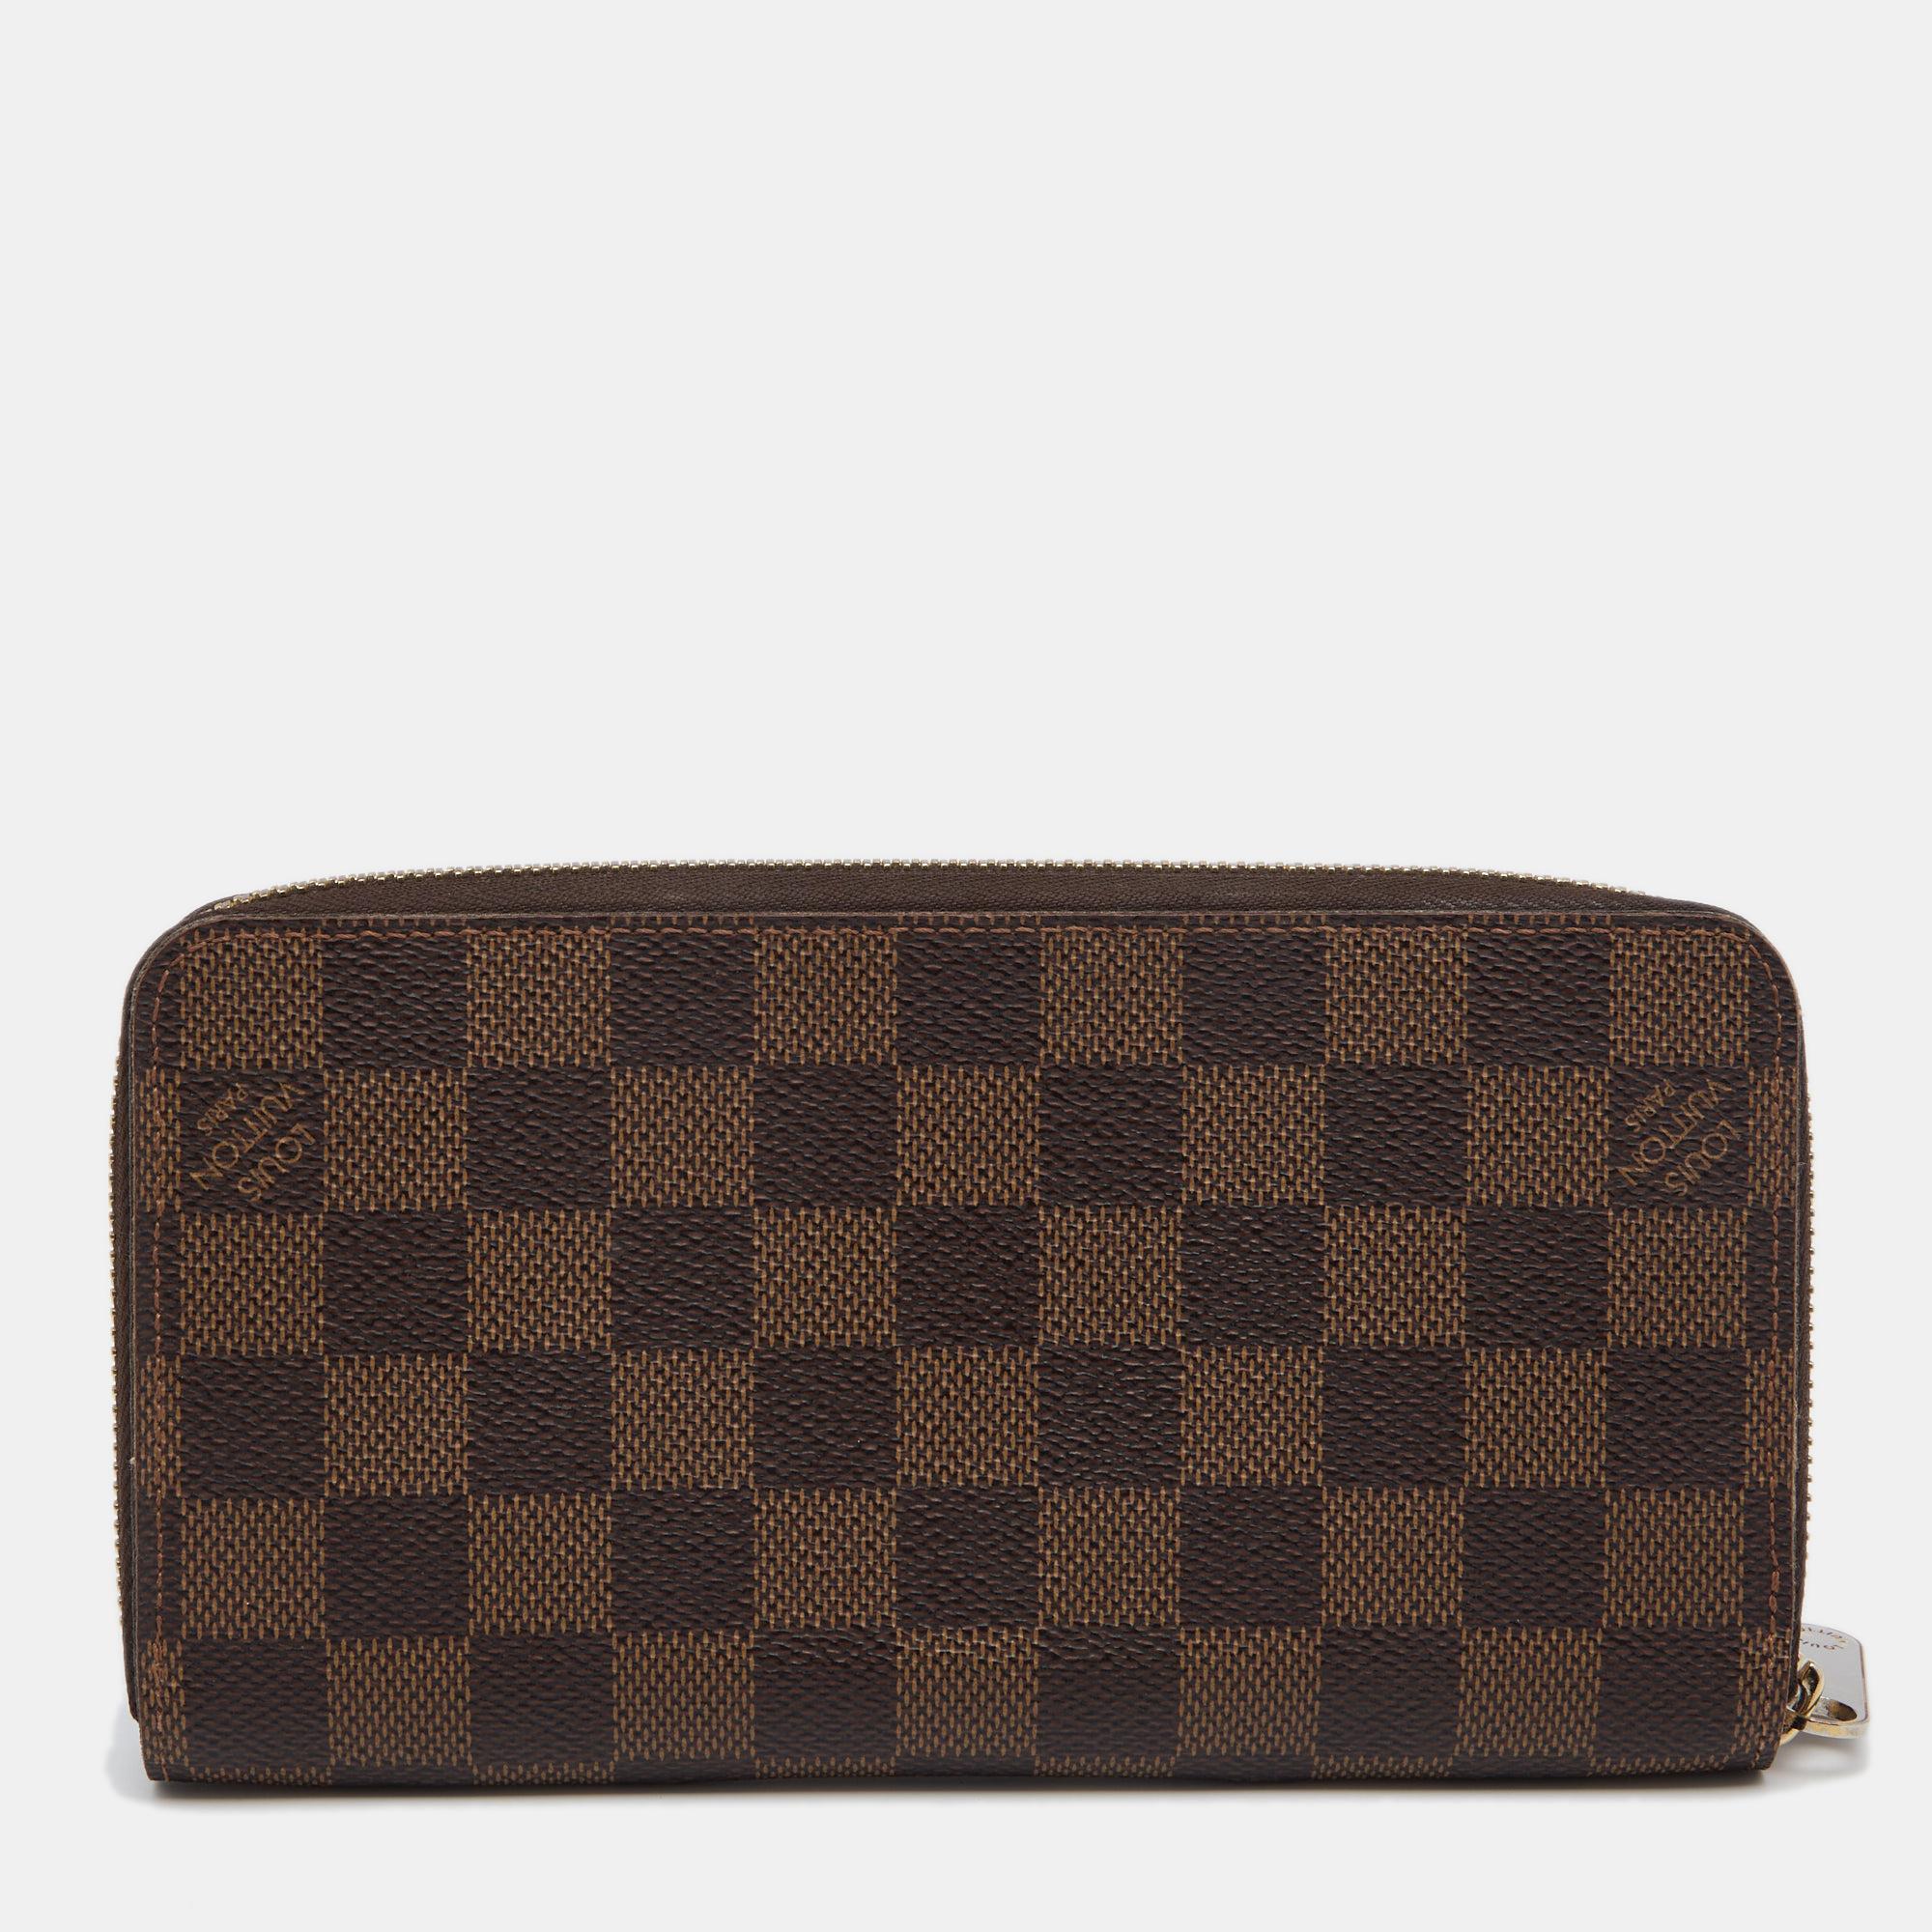 This Louis Vuitton Zippy wallet is conveniently designed for everyday use. Crafted from coated canvas, the wallet has a zip-around closure that opens to reveal multiple slots and compartments for you to neatly arrange your cards.

Includes: Original